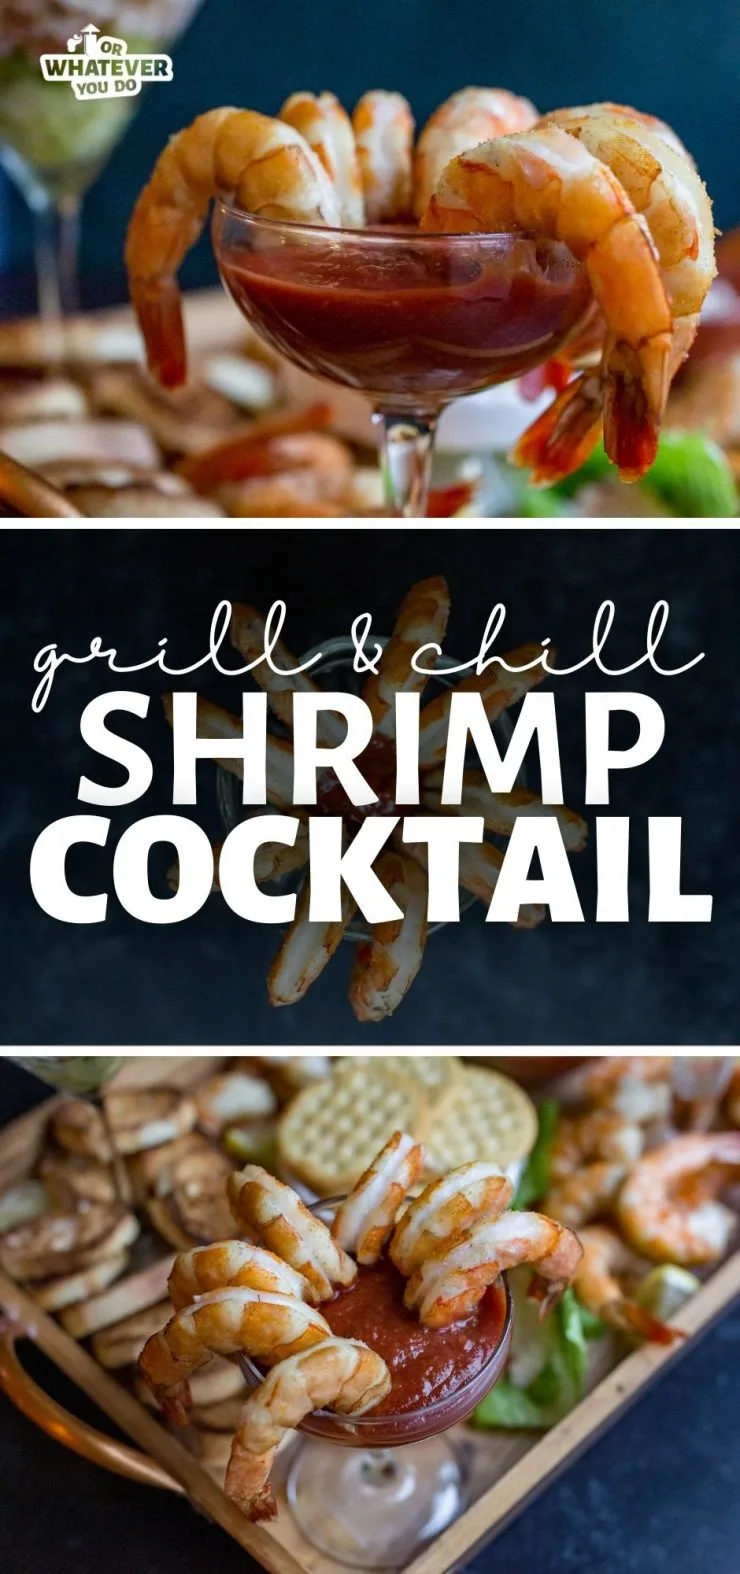 Grill & Chill Shrimp Cocktail